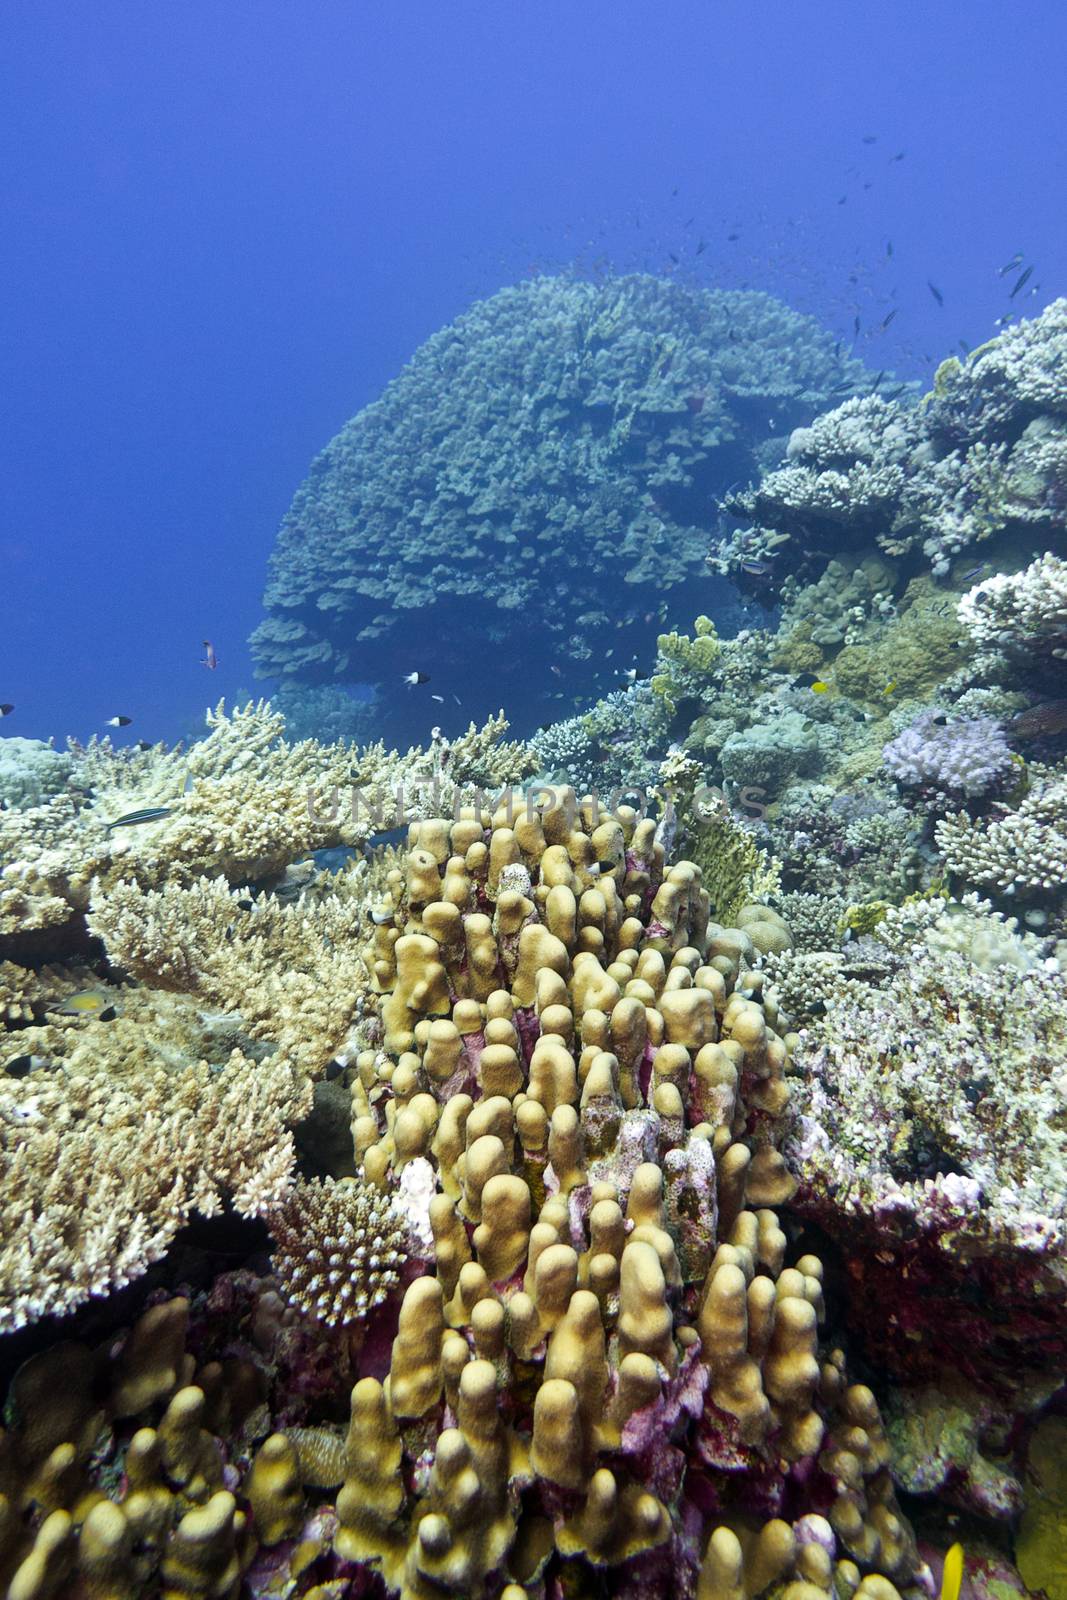 coral reef with great hard corals at the bottom of tropical sea